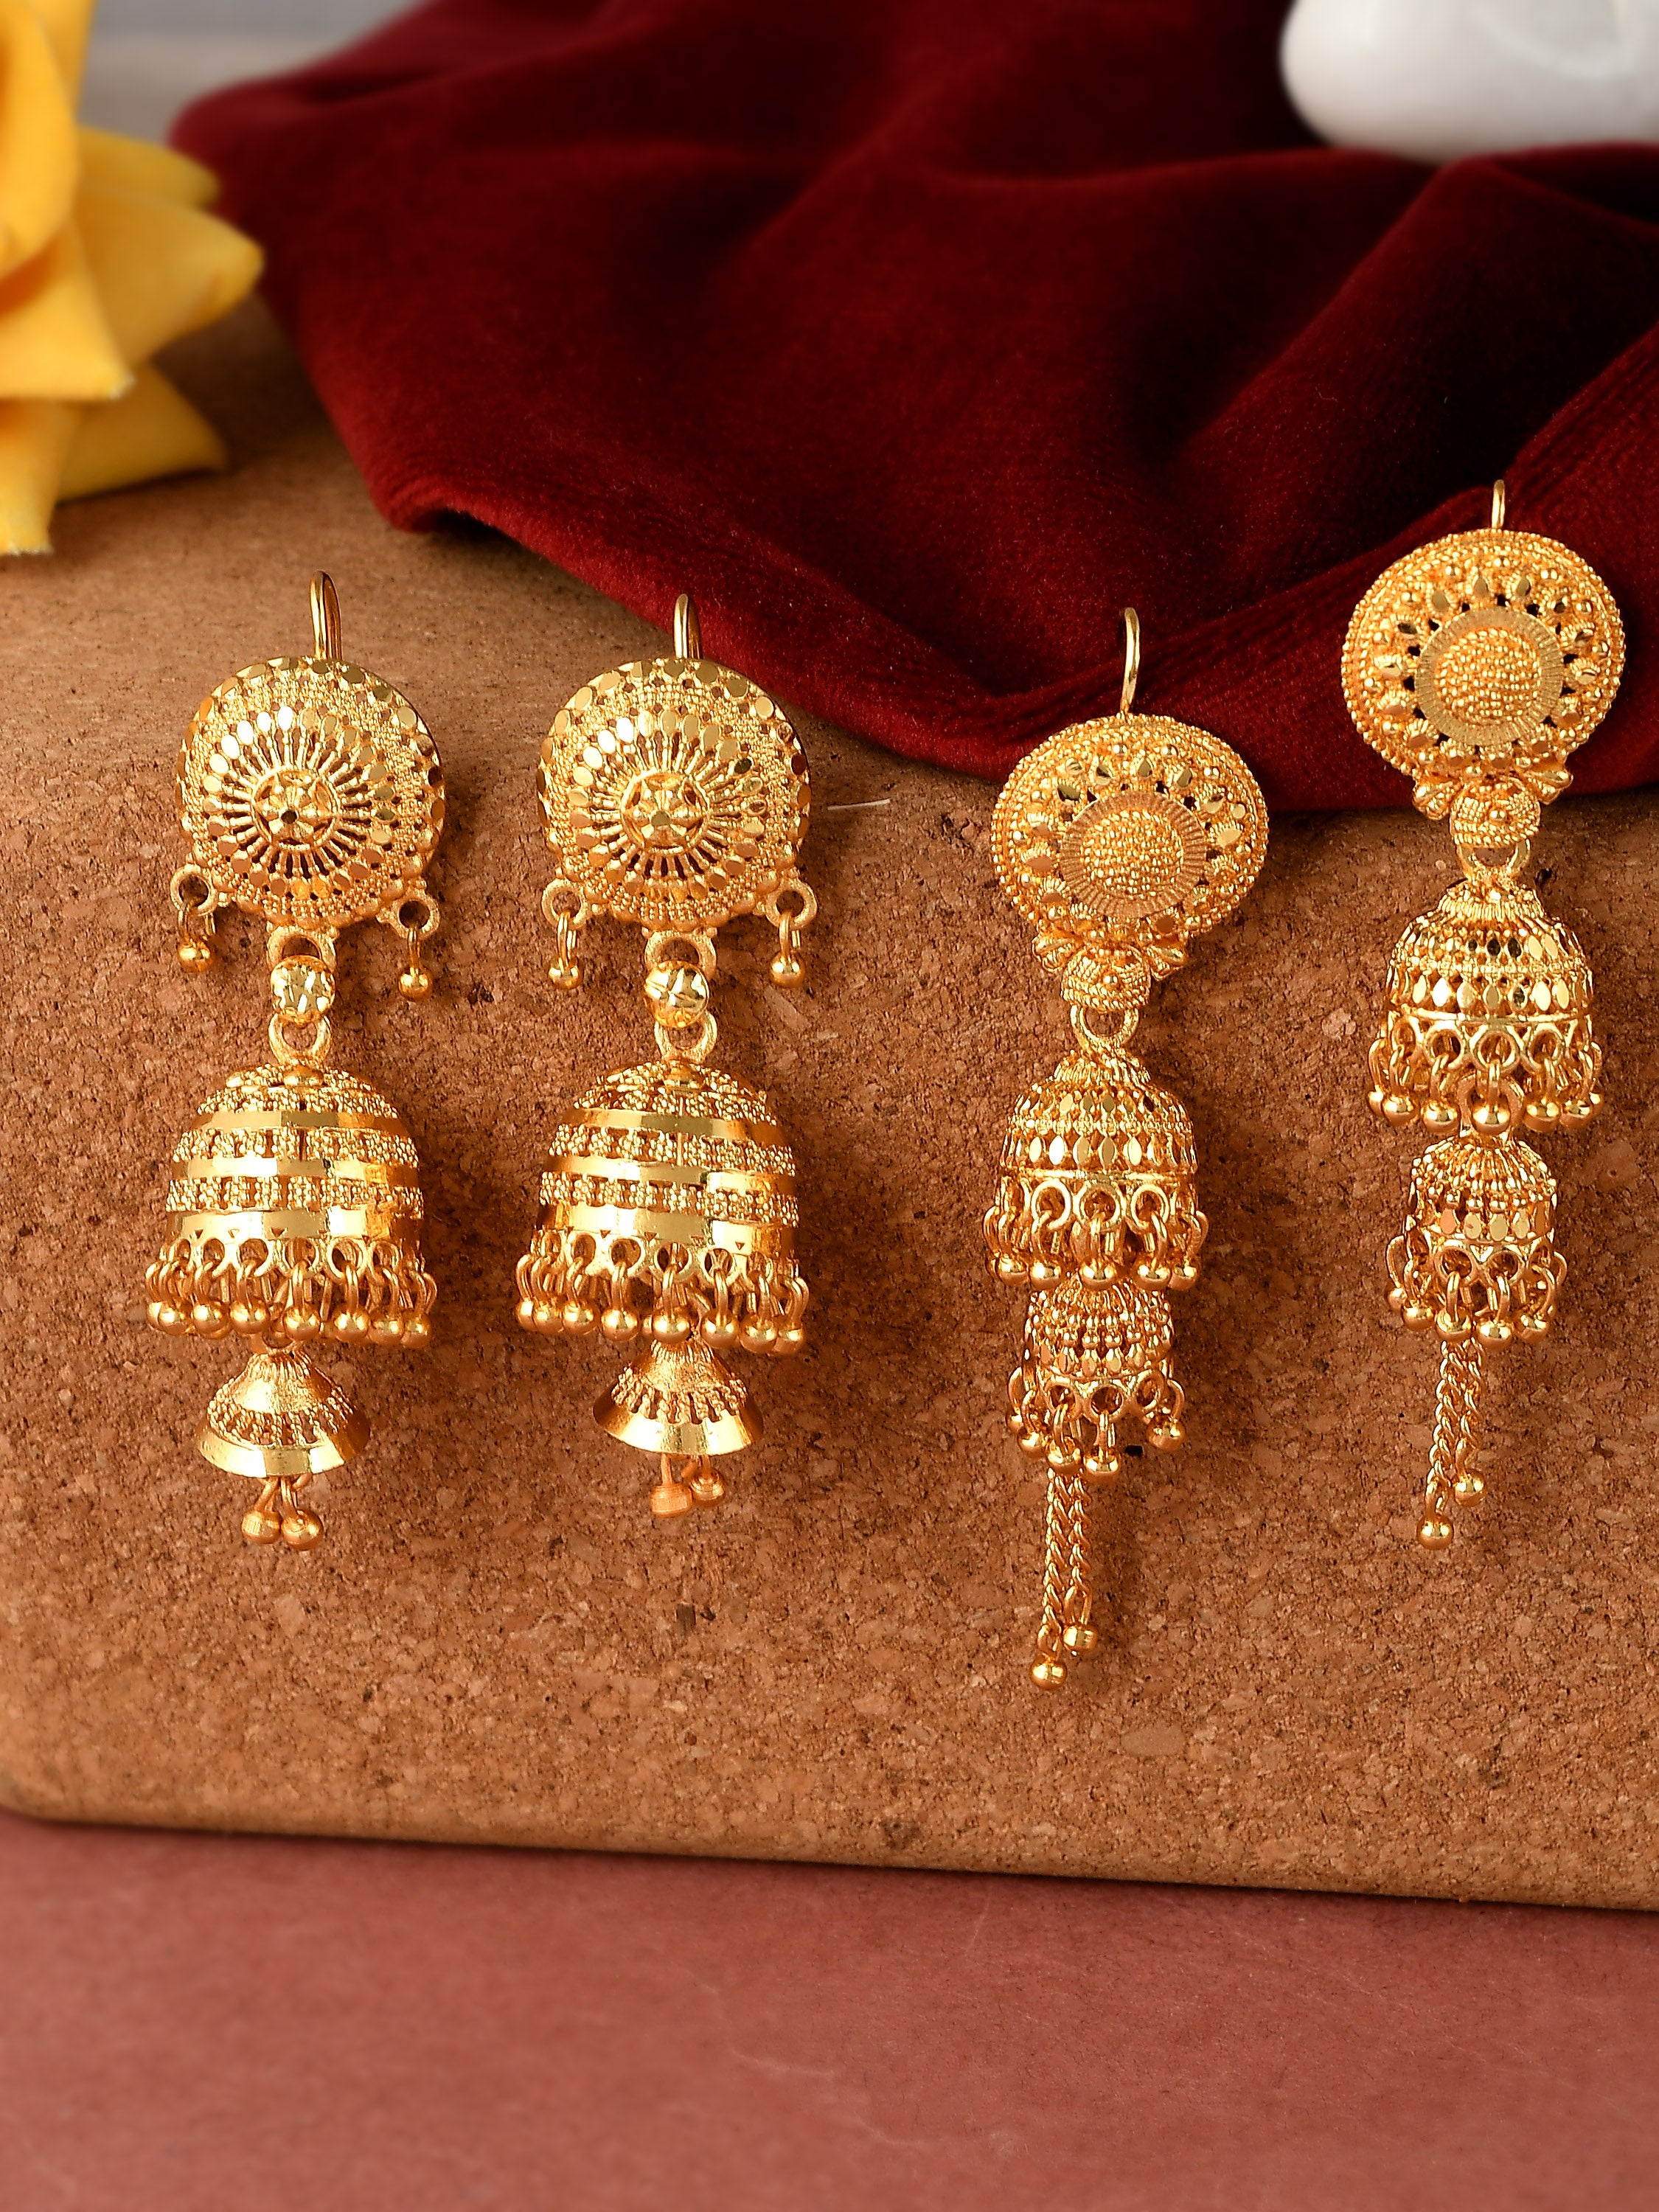 Accessher Gold Plated Traditional and Ethnic Wear Kundan and Pearls  Embellished Statement Jhumki Earrings with Push back Closure for Women and  Girls Pack of 1 Pair | Gifting for Karwachauth | : Amazon.in: Jewellery